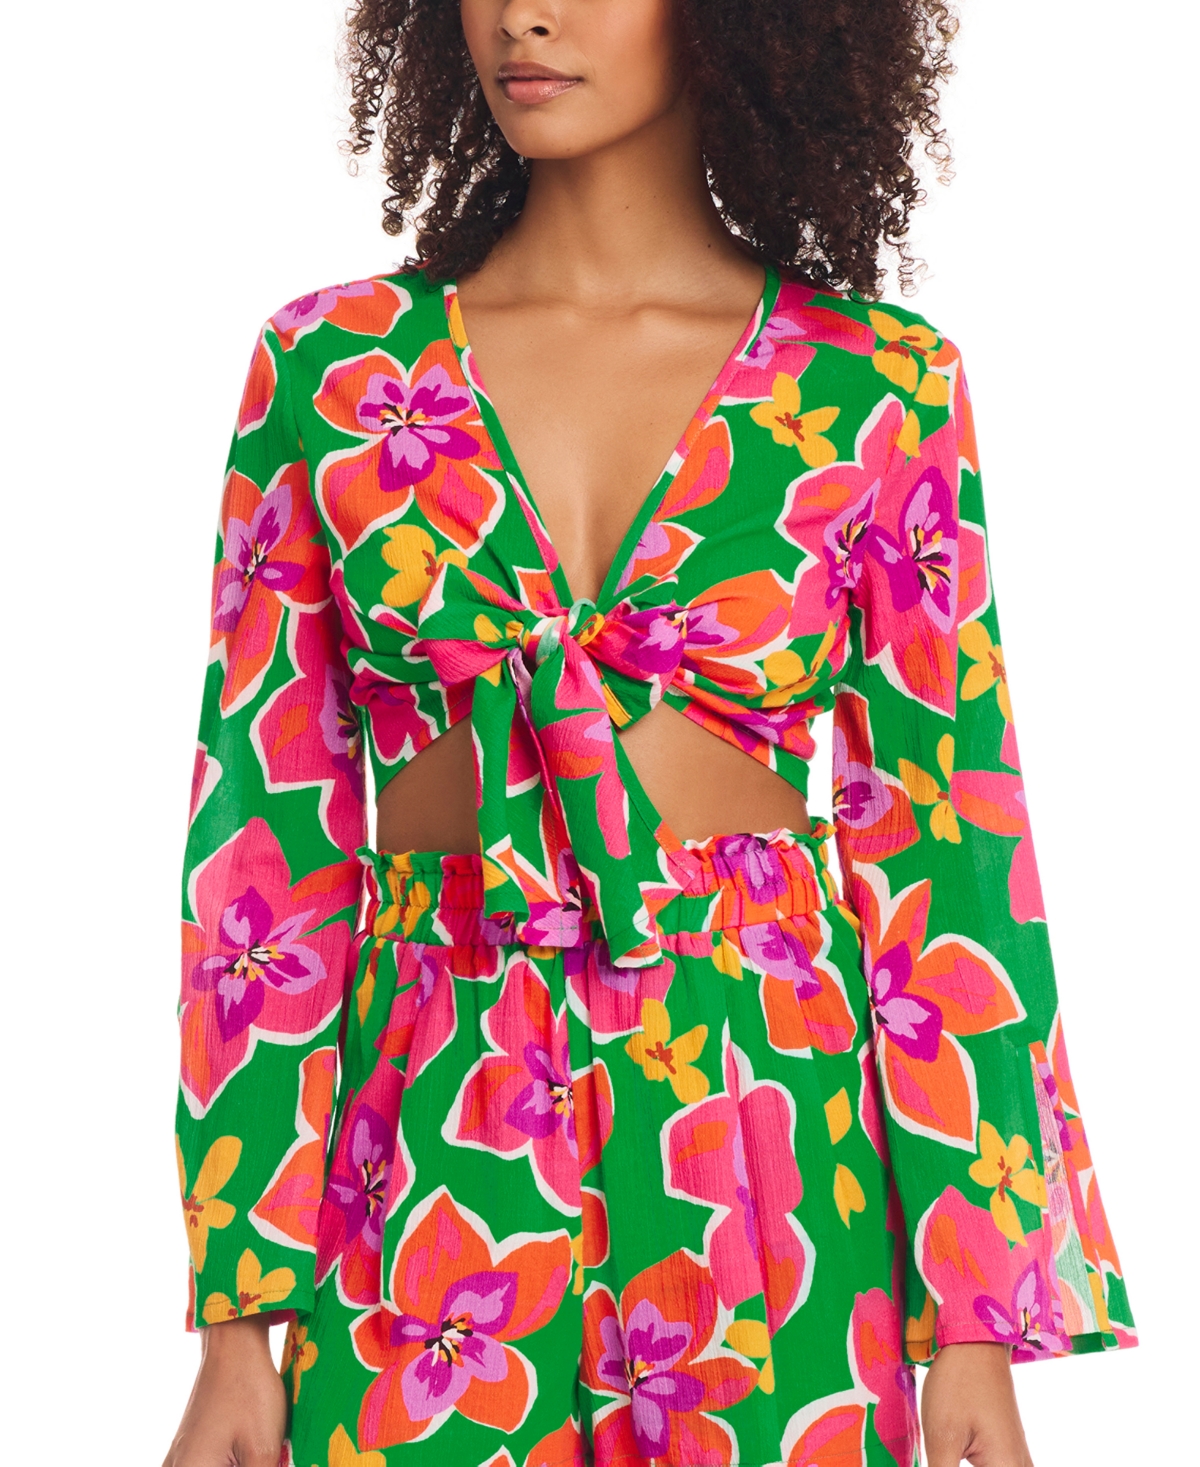 Women's Cotton Tie-Front Cover-Up Top - Multi